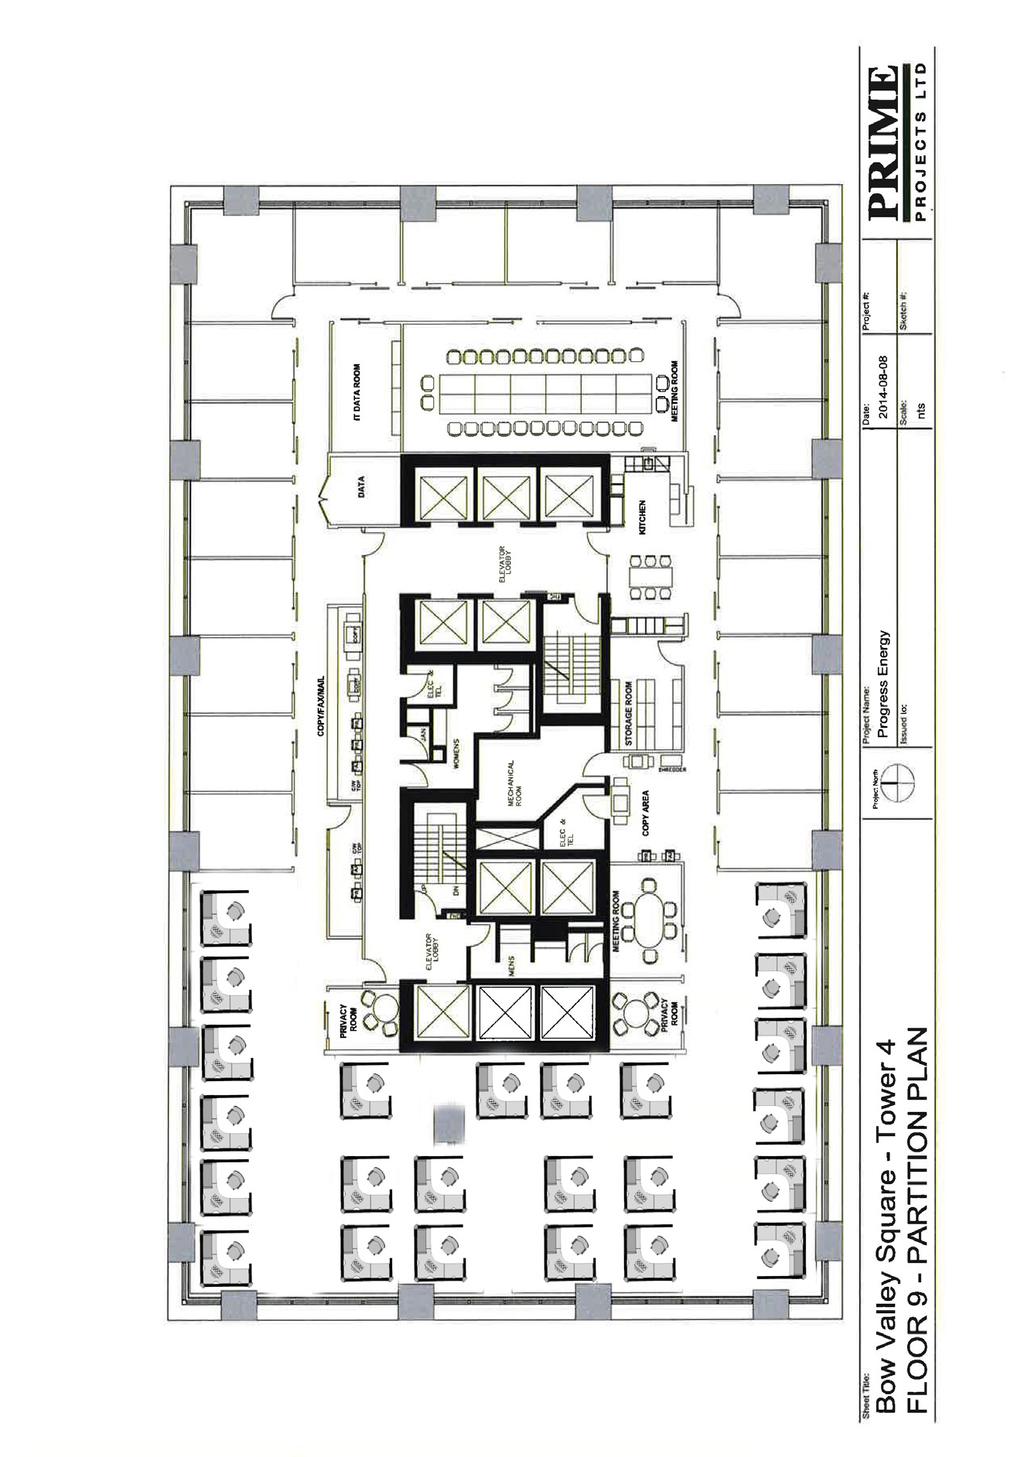 BOW VALLEY SQUARE IV - FLOOR 9 11,516 SQUARE FEET capacity 44 > > 20 perimeter offices > > 24